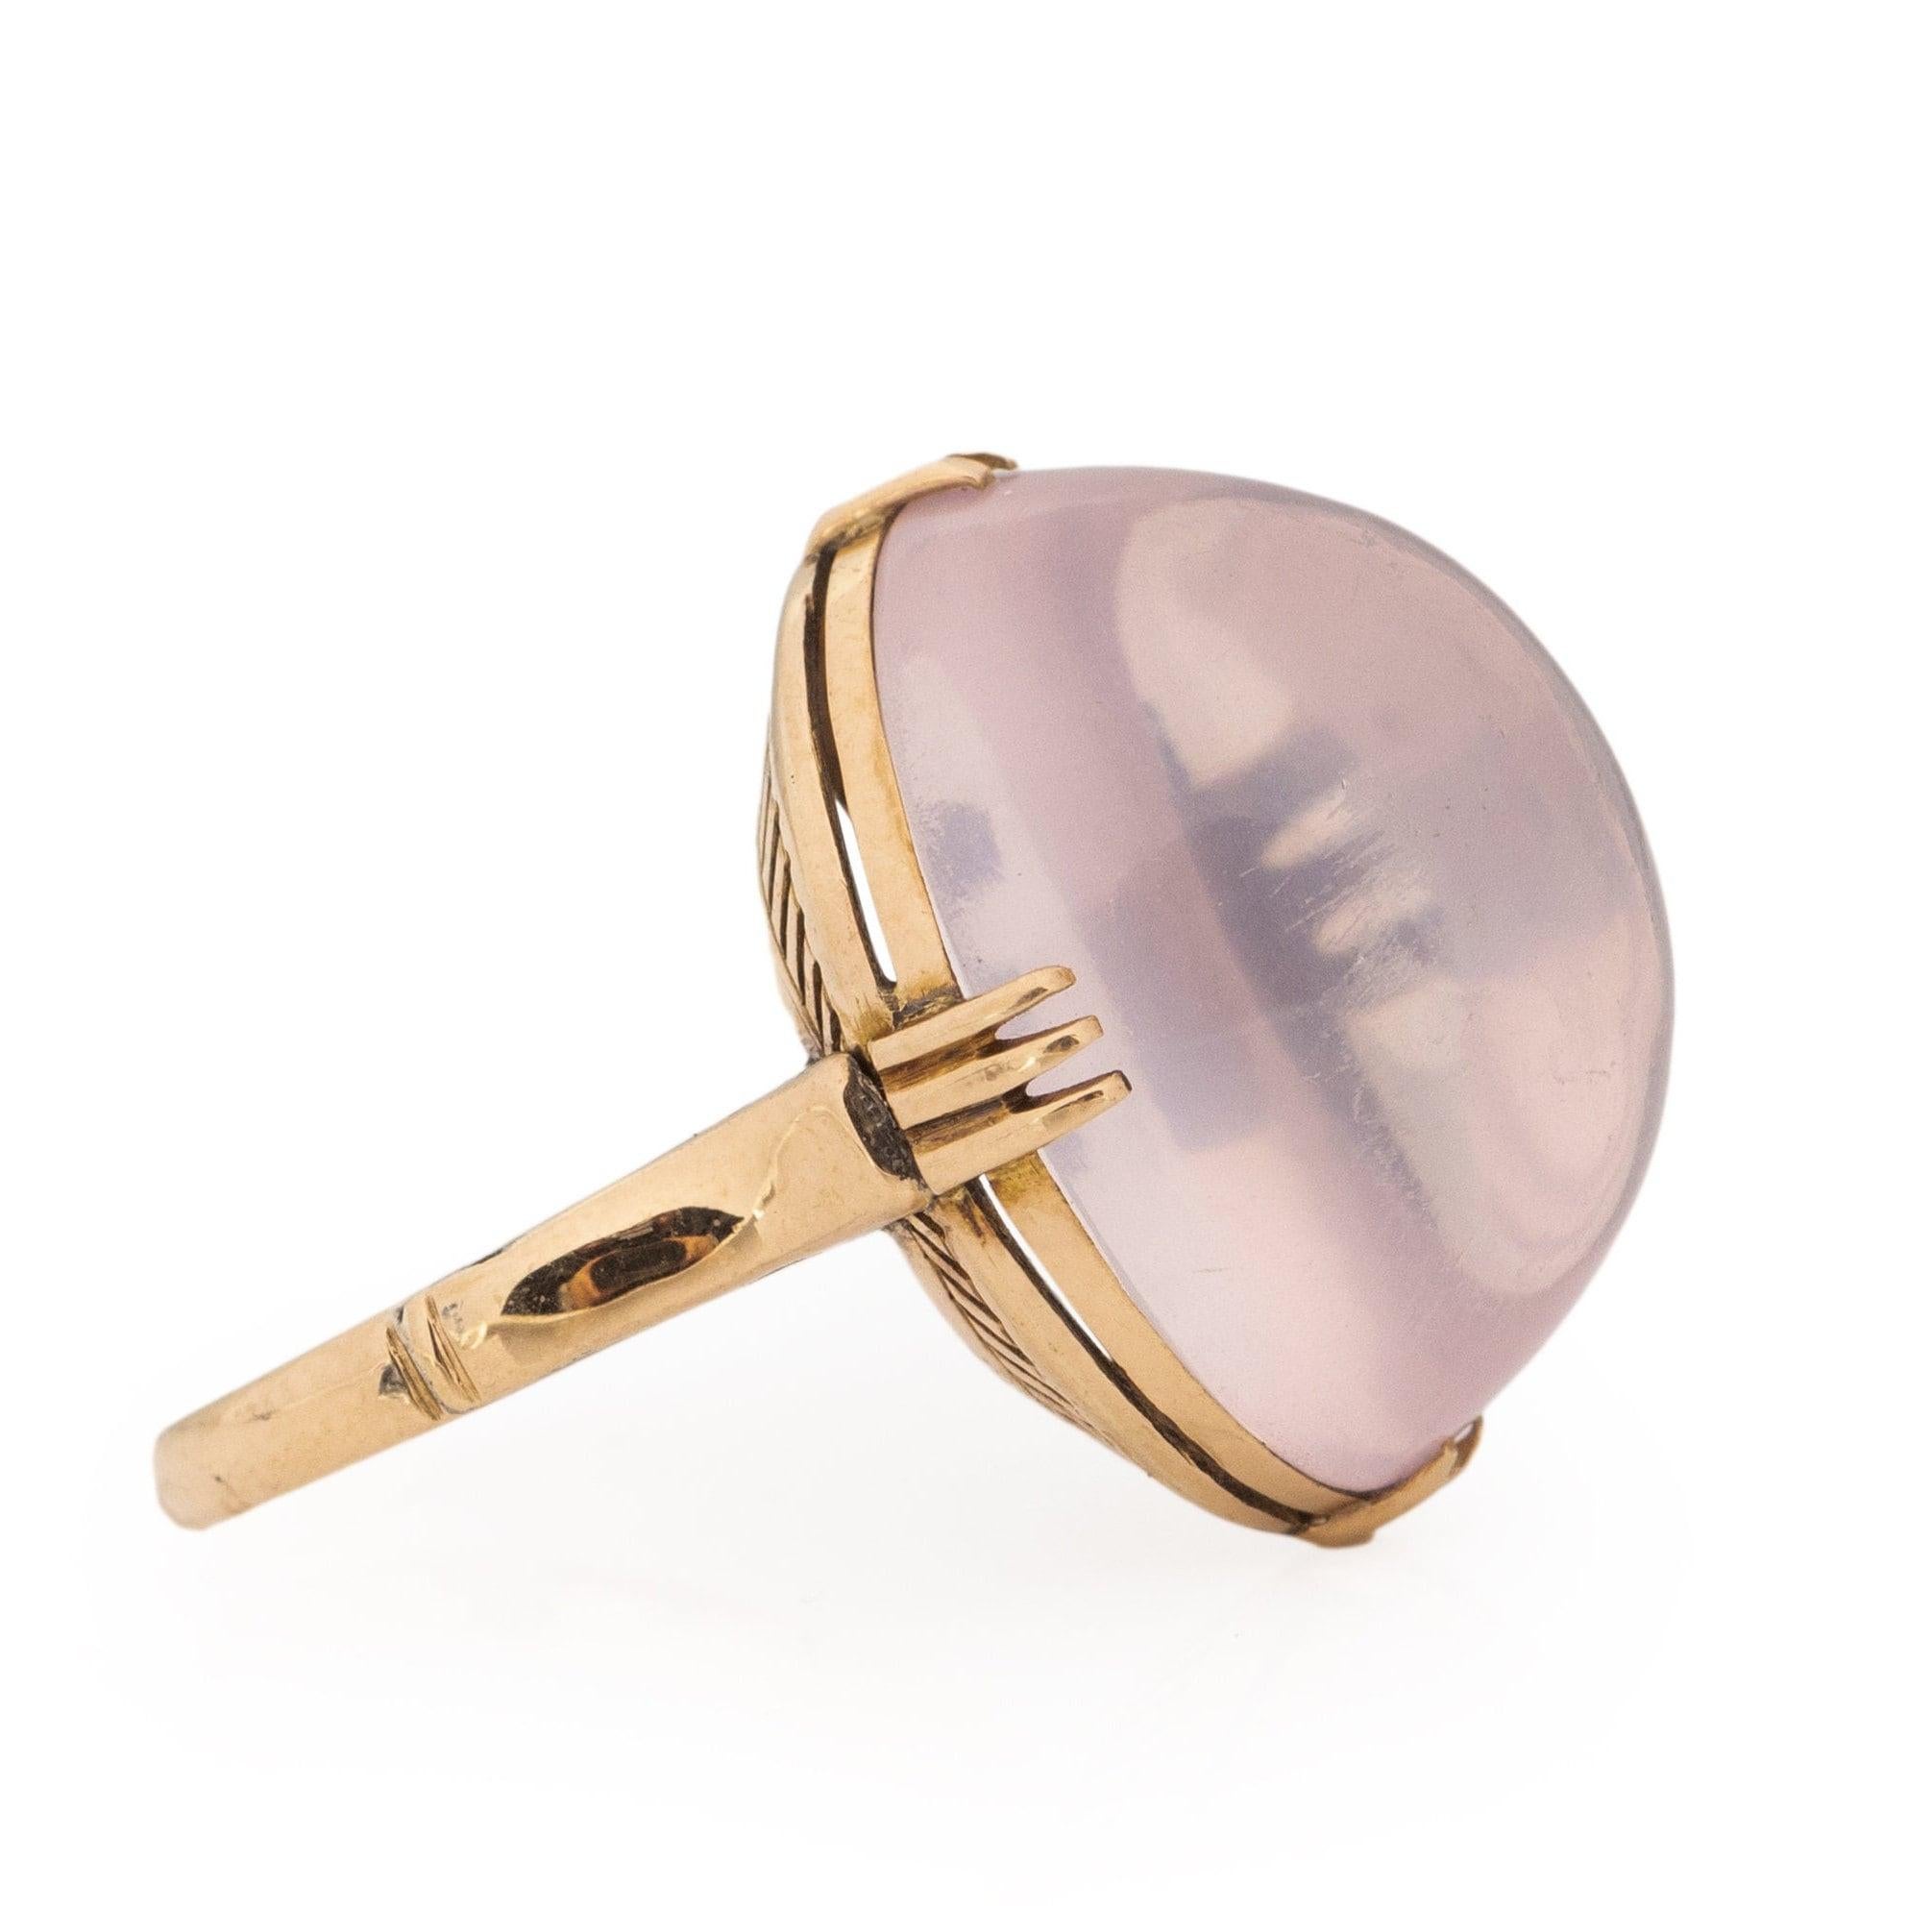 Behold this truly distinctive beauty! The central moonstone, an approximately 18.3Ct oval cabochon, showcases a stunning lavender hue that adds an extraordinary touch. Nestled in an 18K yellow gold prong setting, the gumdrop-shaped moonstone finds